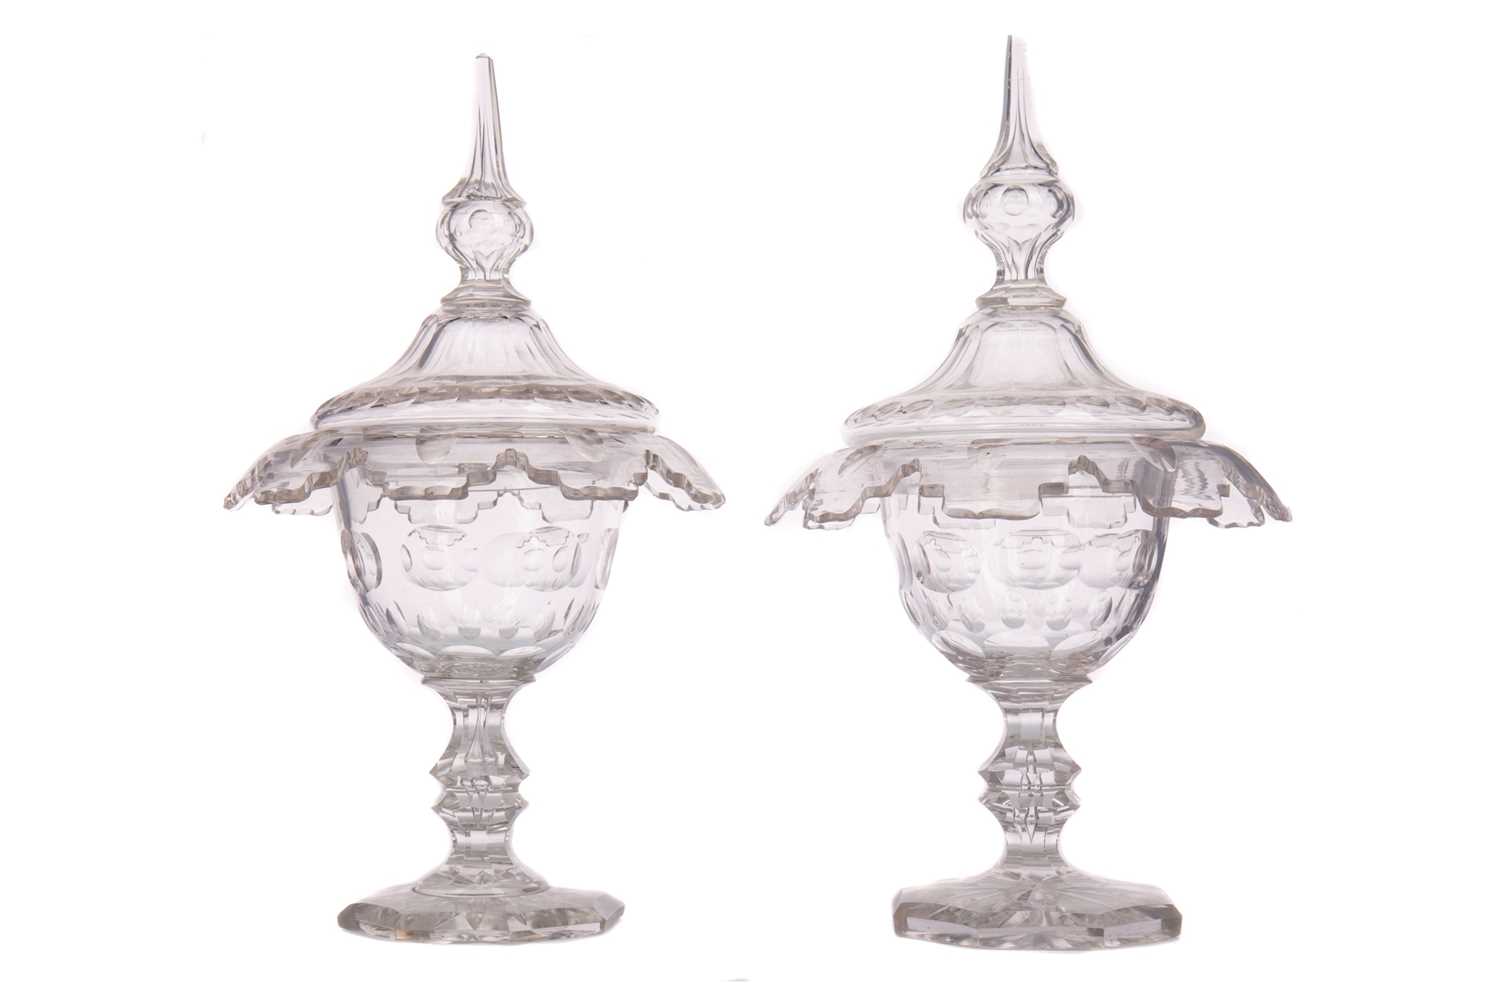 Lot 1110 - AN ATTRACTIVE PAIR OF EARLY VICTORIAN GLASS SWEETMEAT JARS